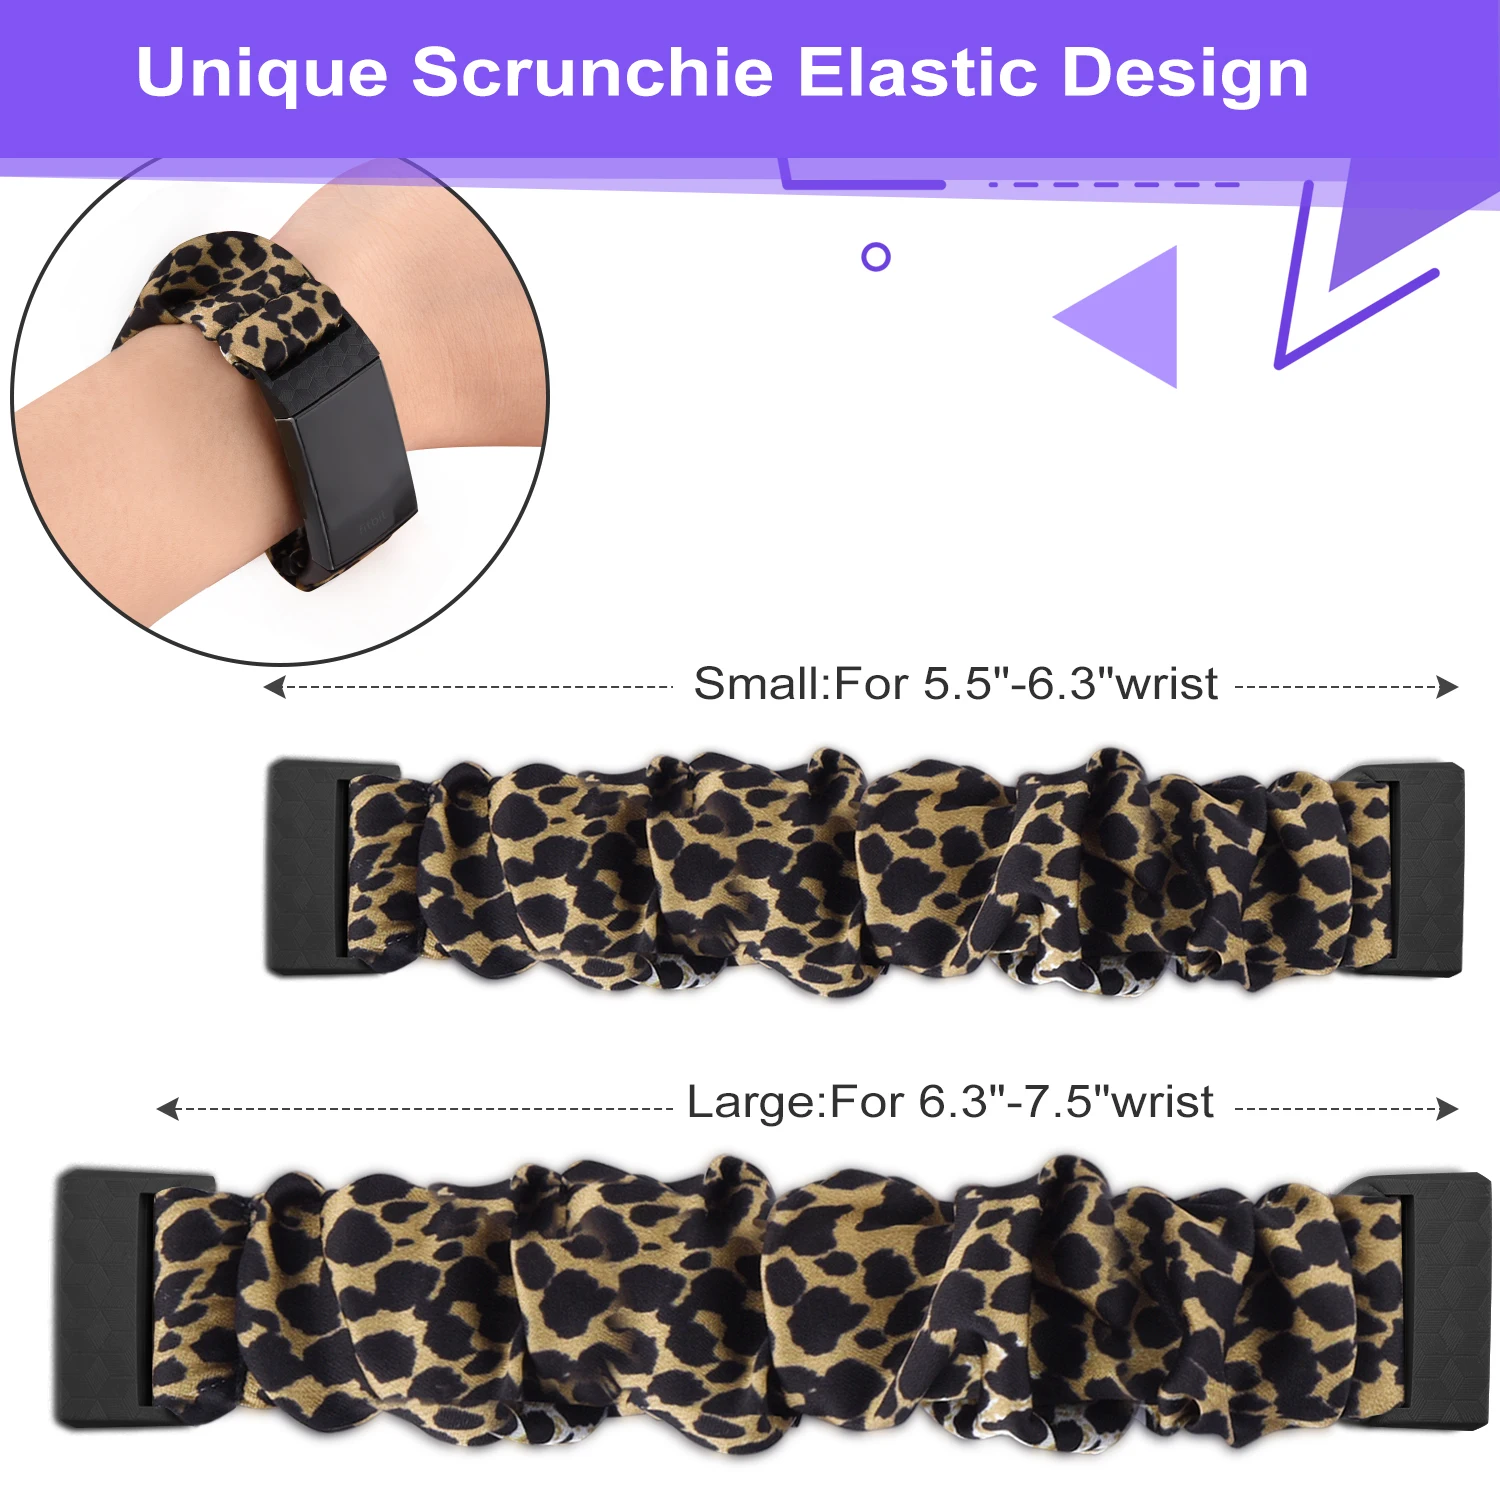 Scrunchie Elastic Bracelet Strap for Fitbit Charge 4 3 Band Fabric Wristband Replacement for Fitbit Charge 3 4 correa Accessory images - 6